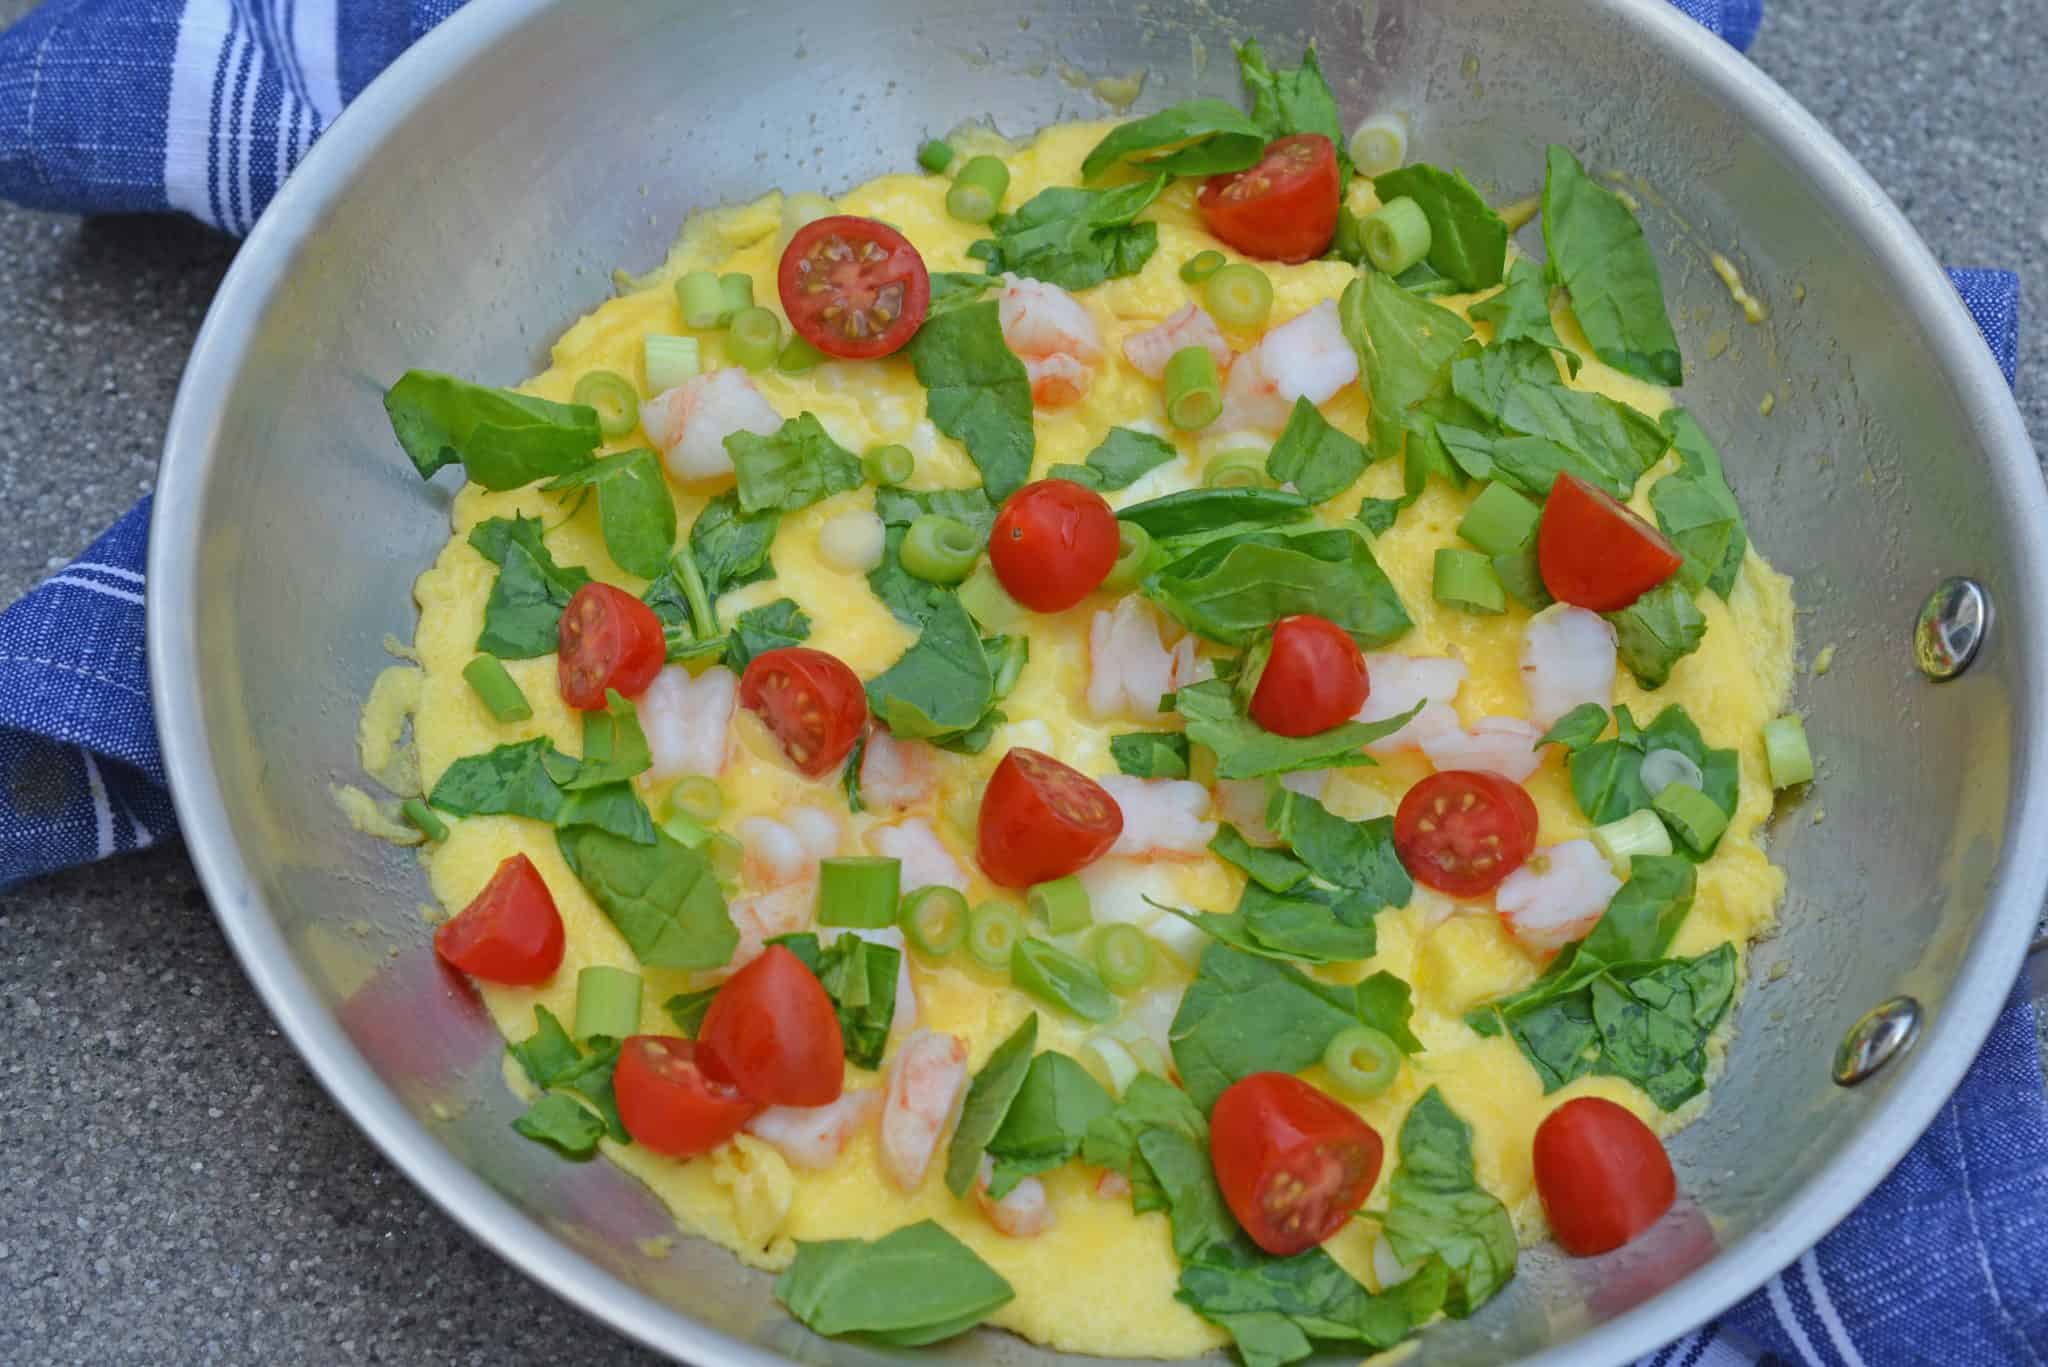 Shrimp Omelette is a savory omelette using shrimp, scallions, spinach, tomatoes and fresh mozzarella cheese. The perfect recipe for brunch!